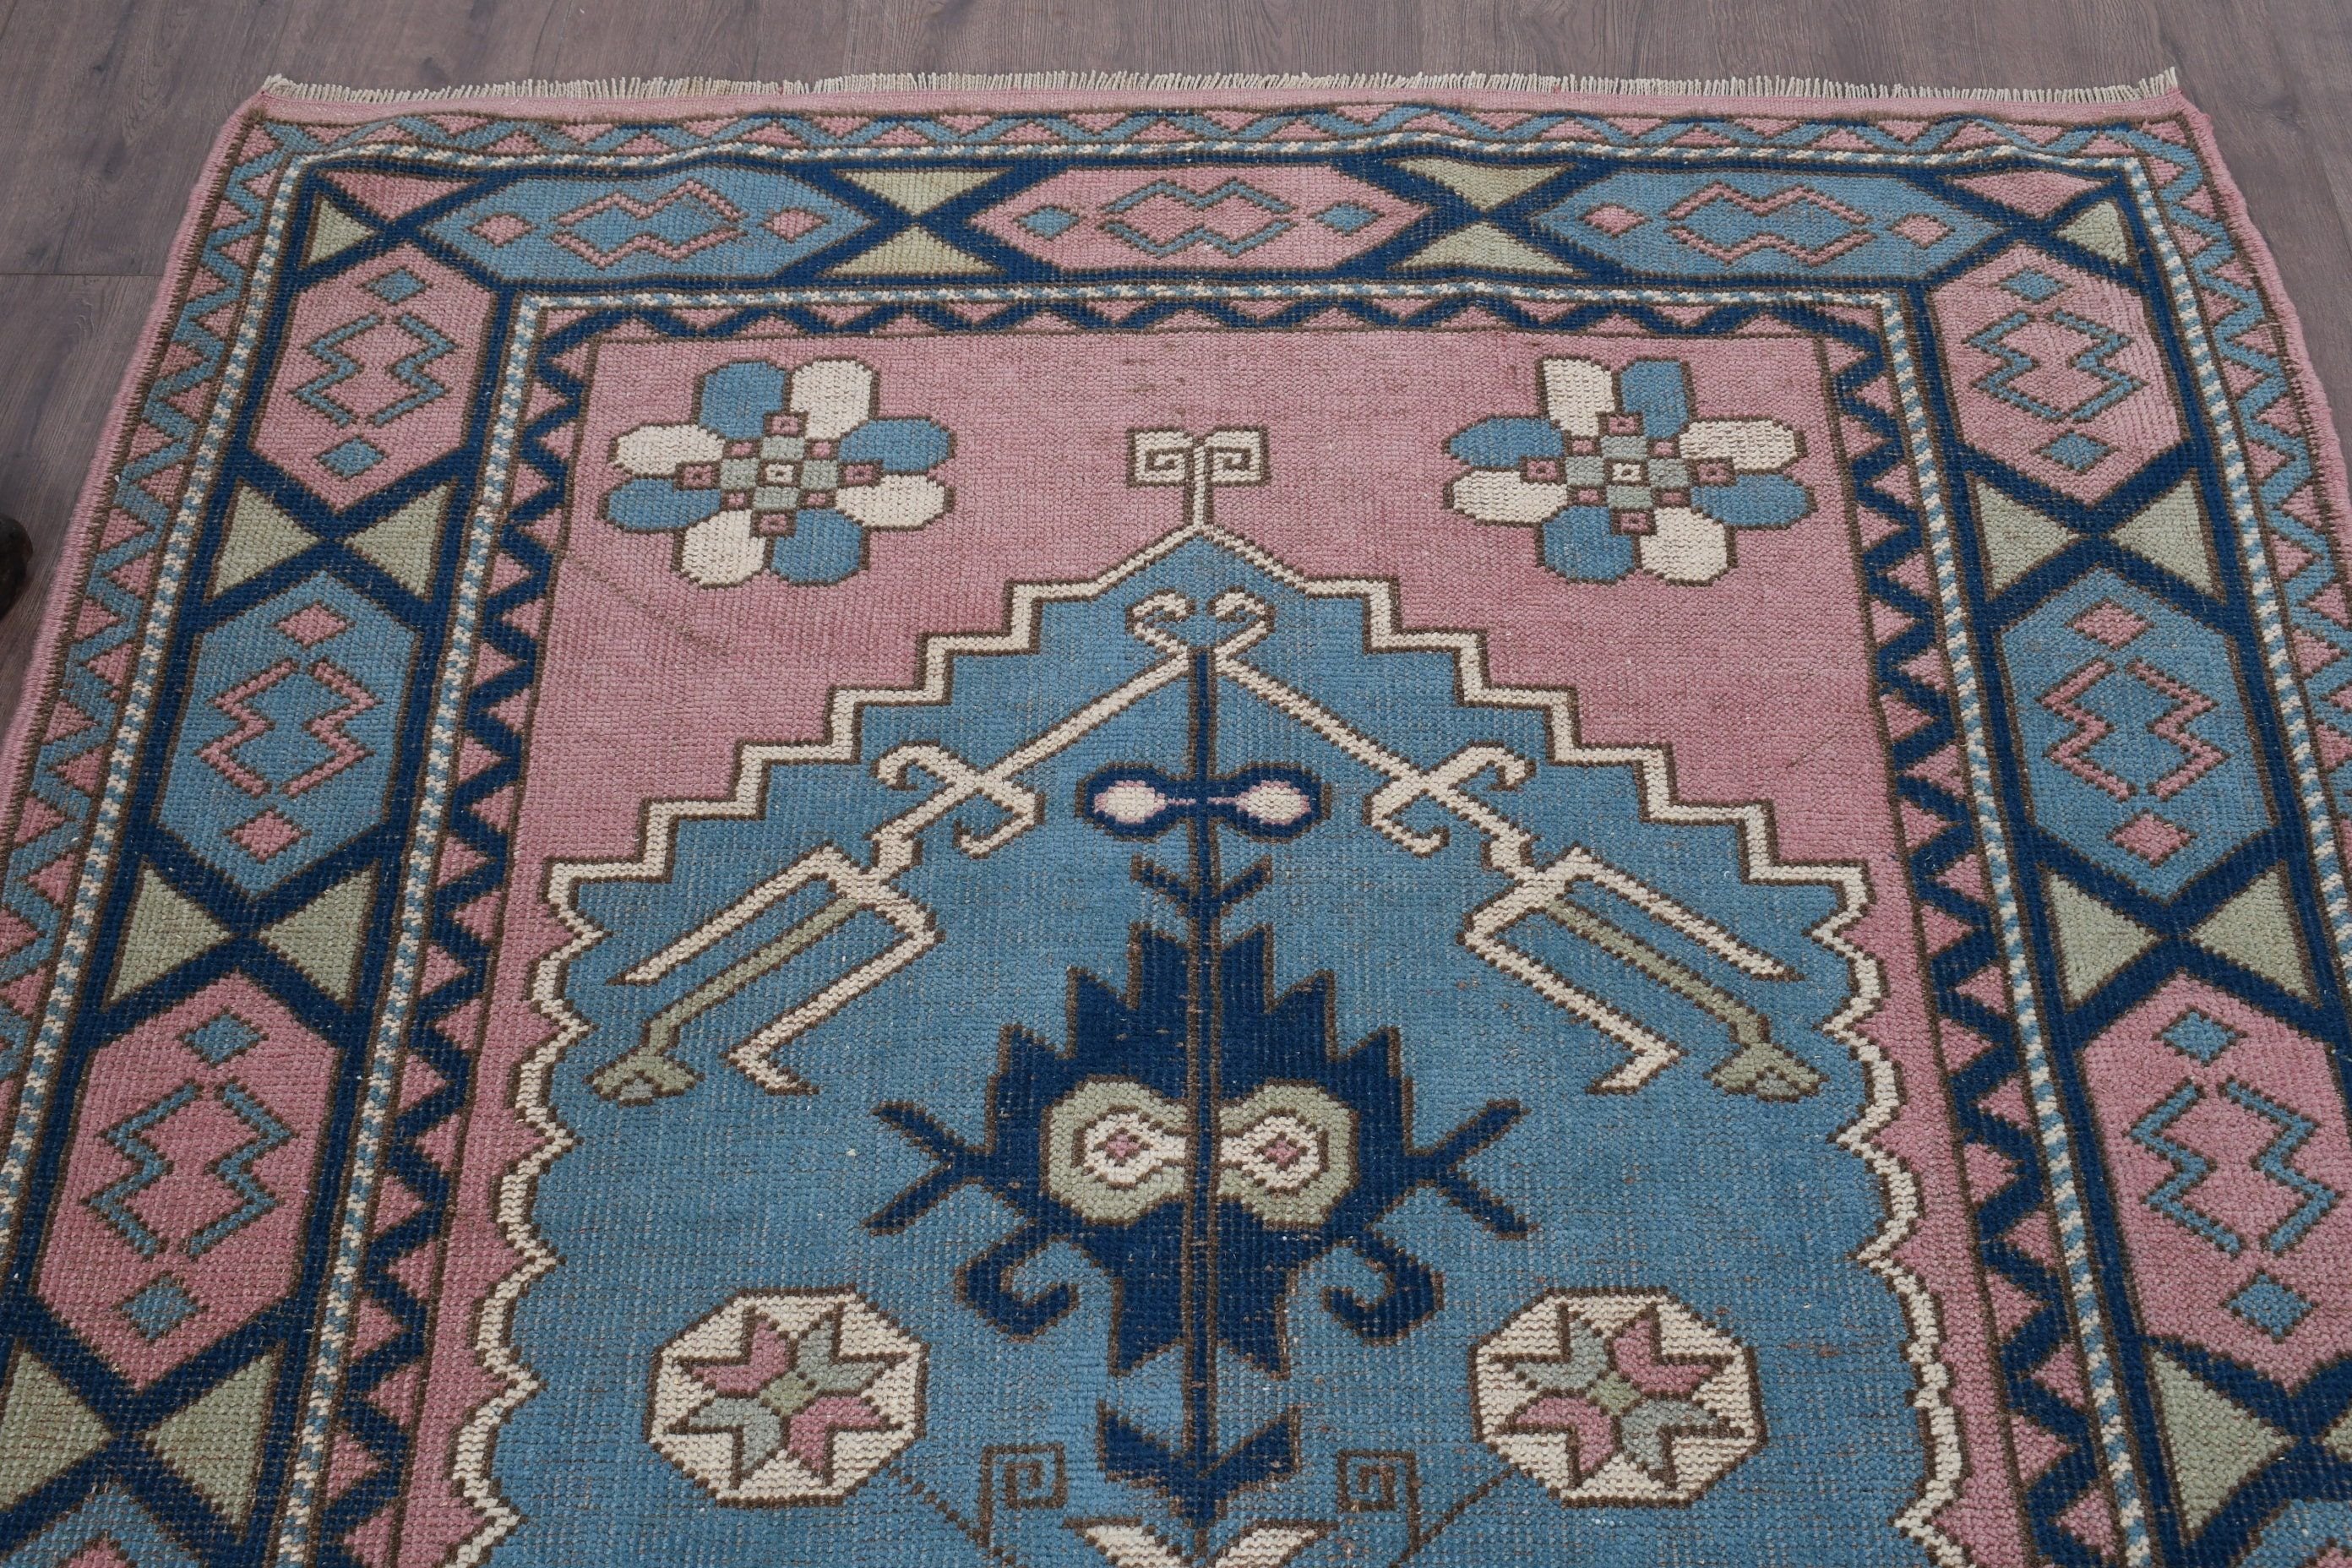 Vintage Rug, Pink Kitchen Rug, Anatolian Rug, 4.3x7 ft Area Rug, Bedroom Rugs, Hand Woven Rugs, Indoor Rugs, Rugs for Area, Turkish Rugs